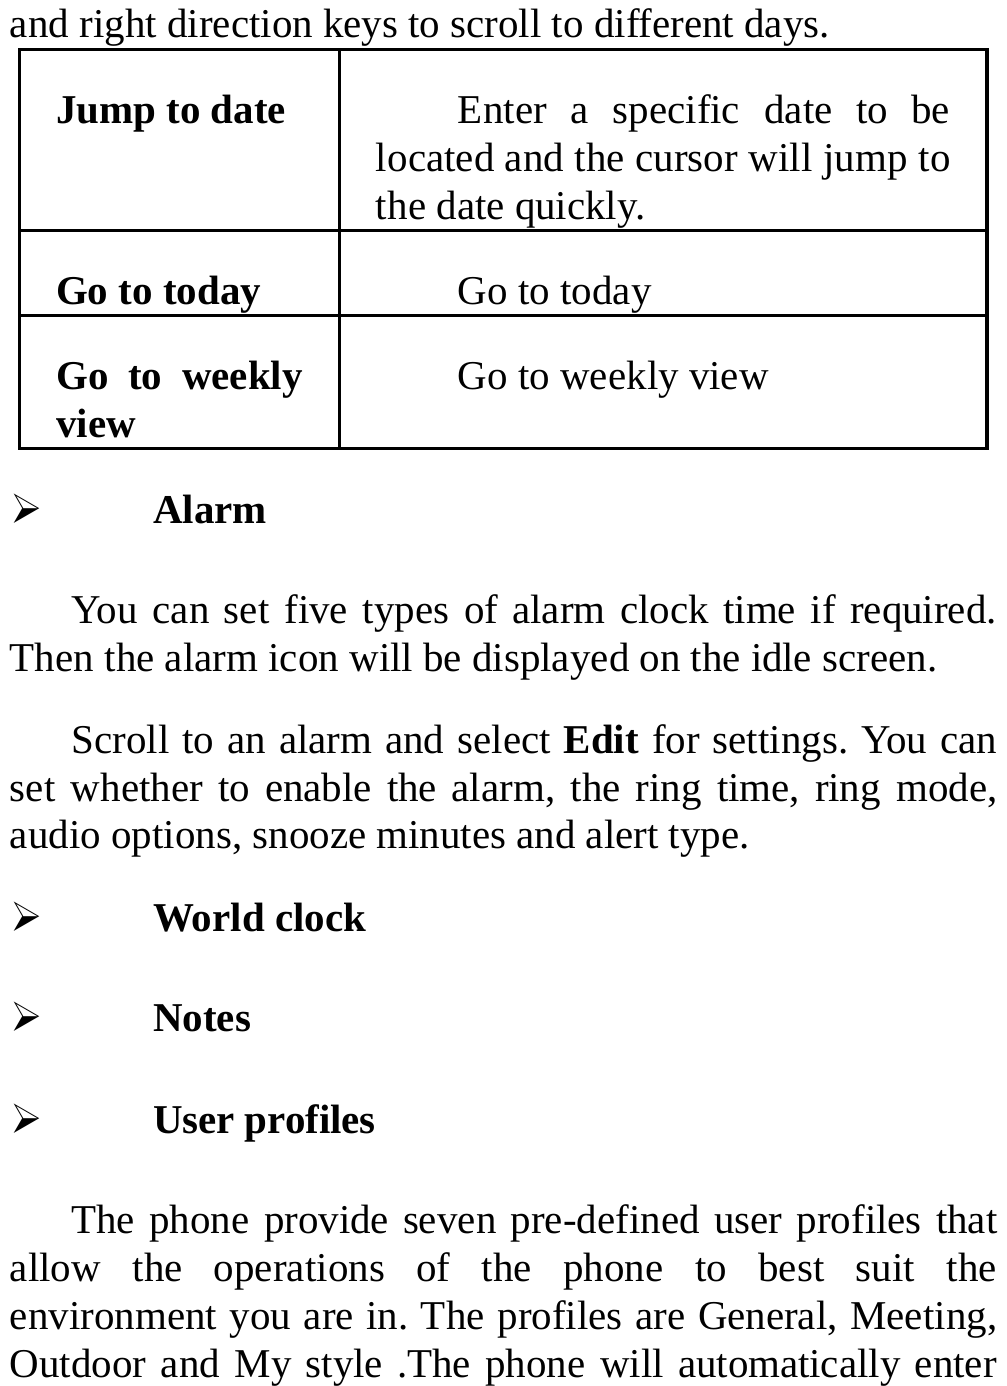  and right direction keys to scroll to different days. Jump to date  Enter a specific date to be located and the cursor will jump to the date quickly. Go to today  Go to today Go to weekly view  Go to weekly view ¾ Alarm You can set five types of alarm clock time if required. Then the alarm icon will be displayed on the idle screen. Scroll to an alarm and select Edit for settings. You can set whether to enable the alarm, the ring time, ring mode, audio options, snooze minutes and alert type. ¾ World clock ¾ Notes ¾ User profiles The phone provide seven pre-defined user profiles that allow the operations of the phone to best suit the environment you are in. The profiles are General, Meeting, Outdoor and My style .The phone will automatically enter 